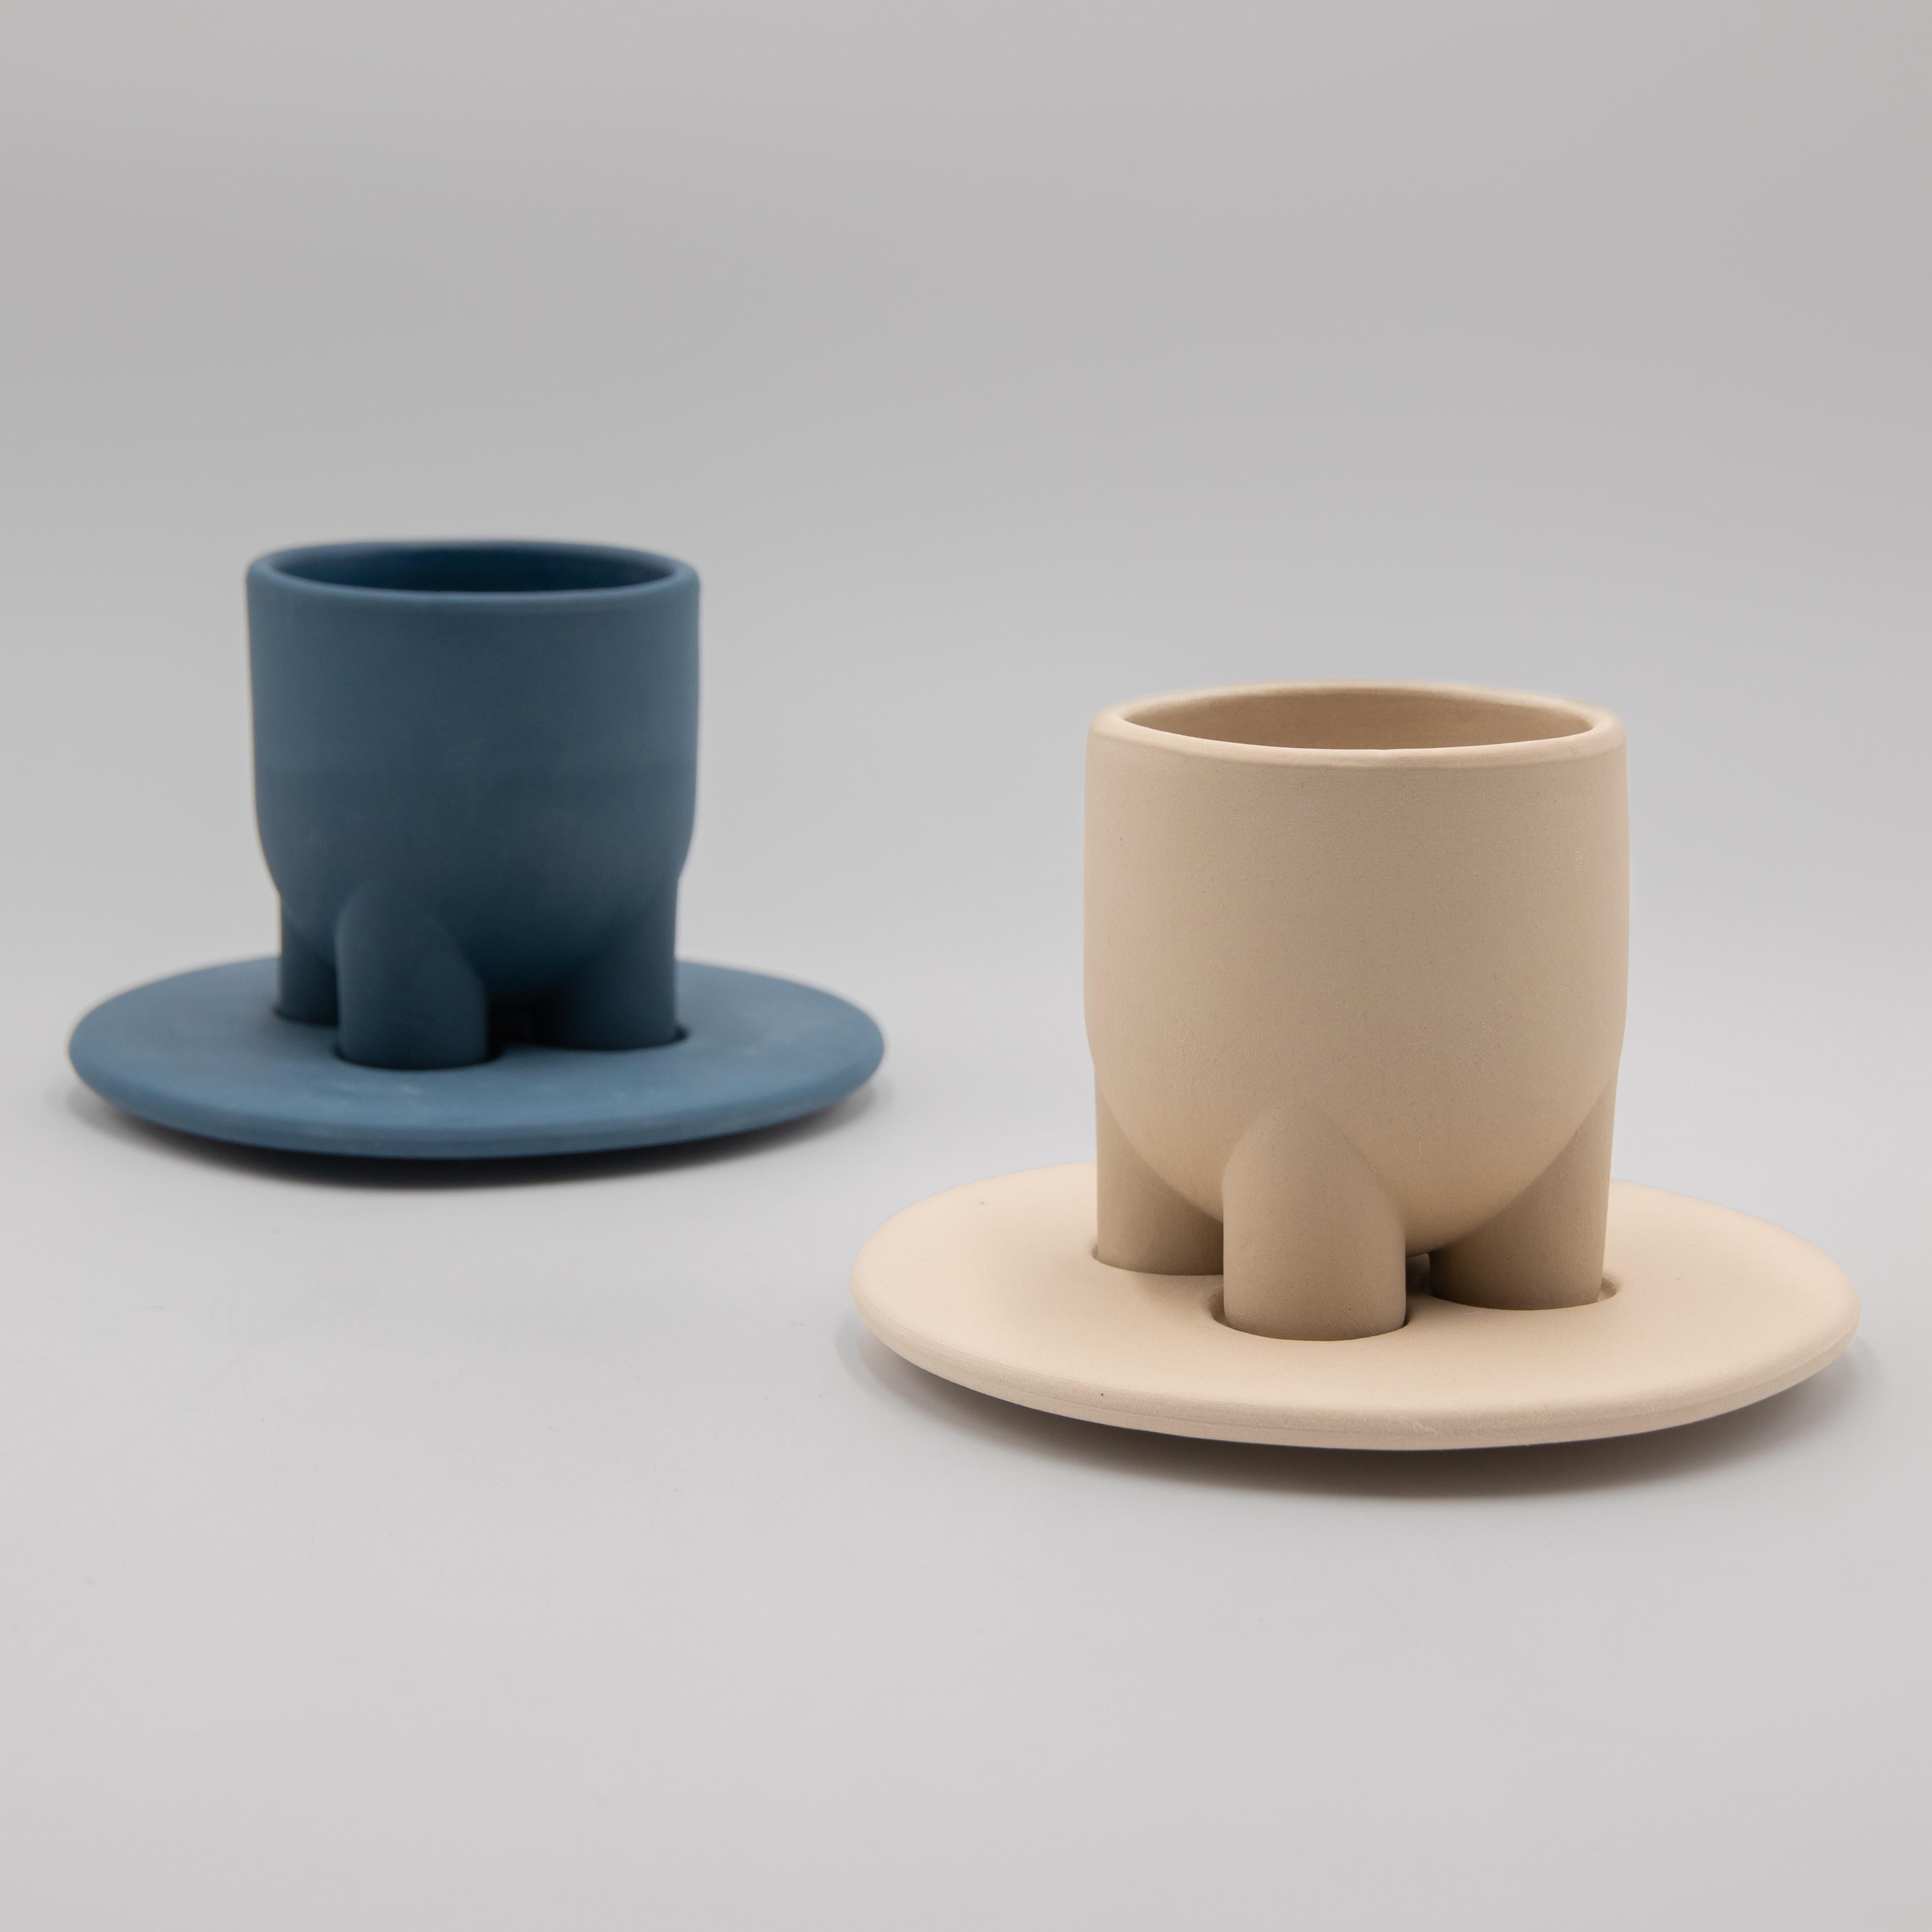 A modern coffee cup and saucer set design drawing inspiration from the coffee traditions of Italy and Iran. Simple geometric shapes, clean lines and a truly unique design make UUUUcio the perfect vessel for daily use and a decorative object.